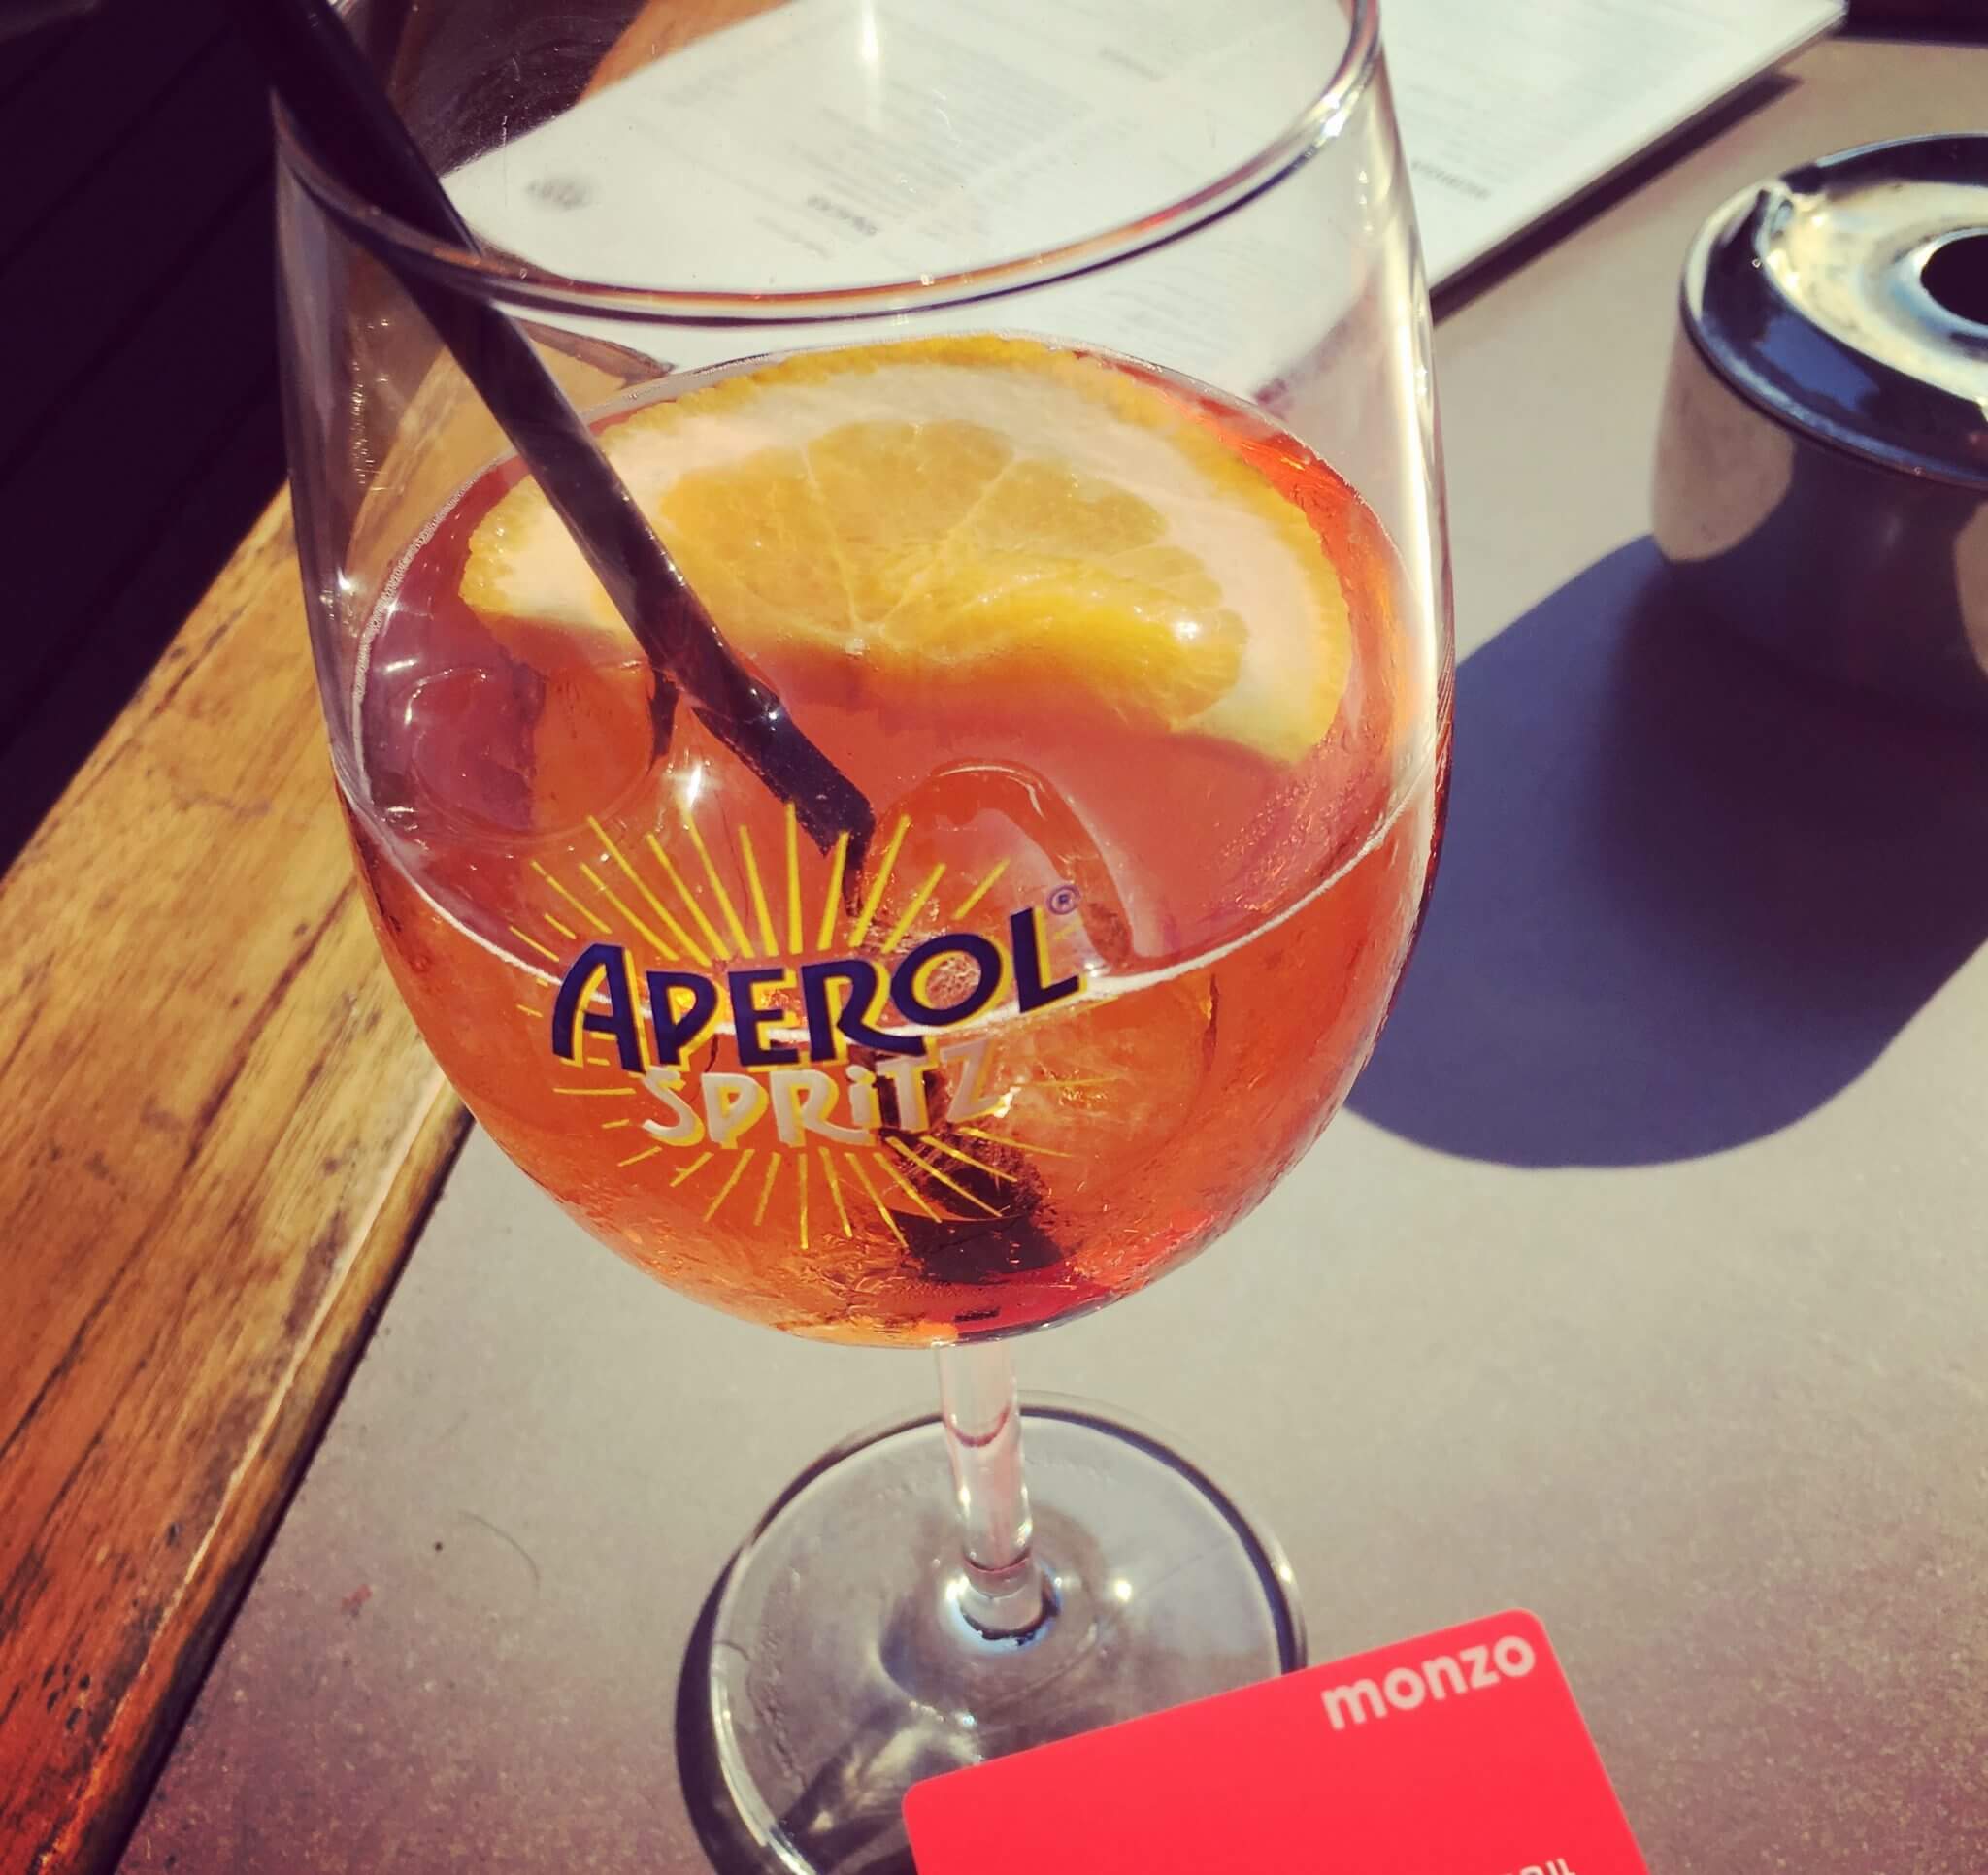 Photo of Monzo card used to pay abroad